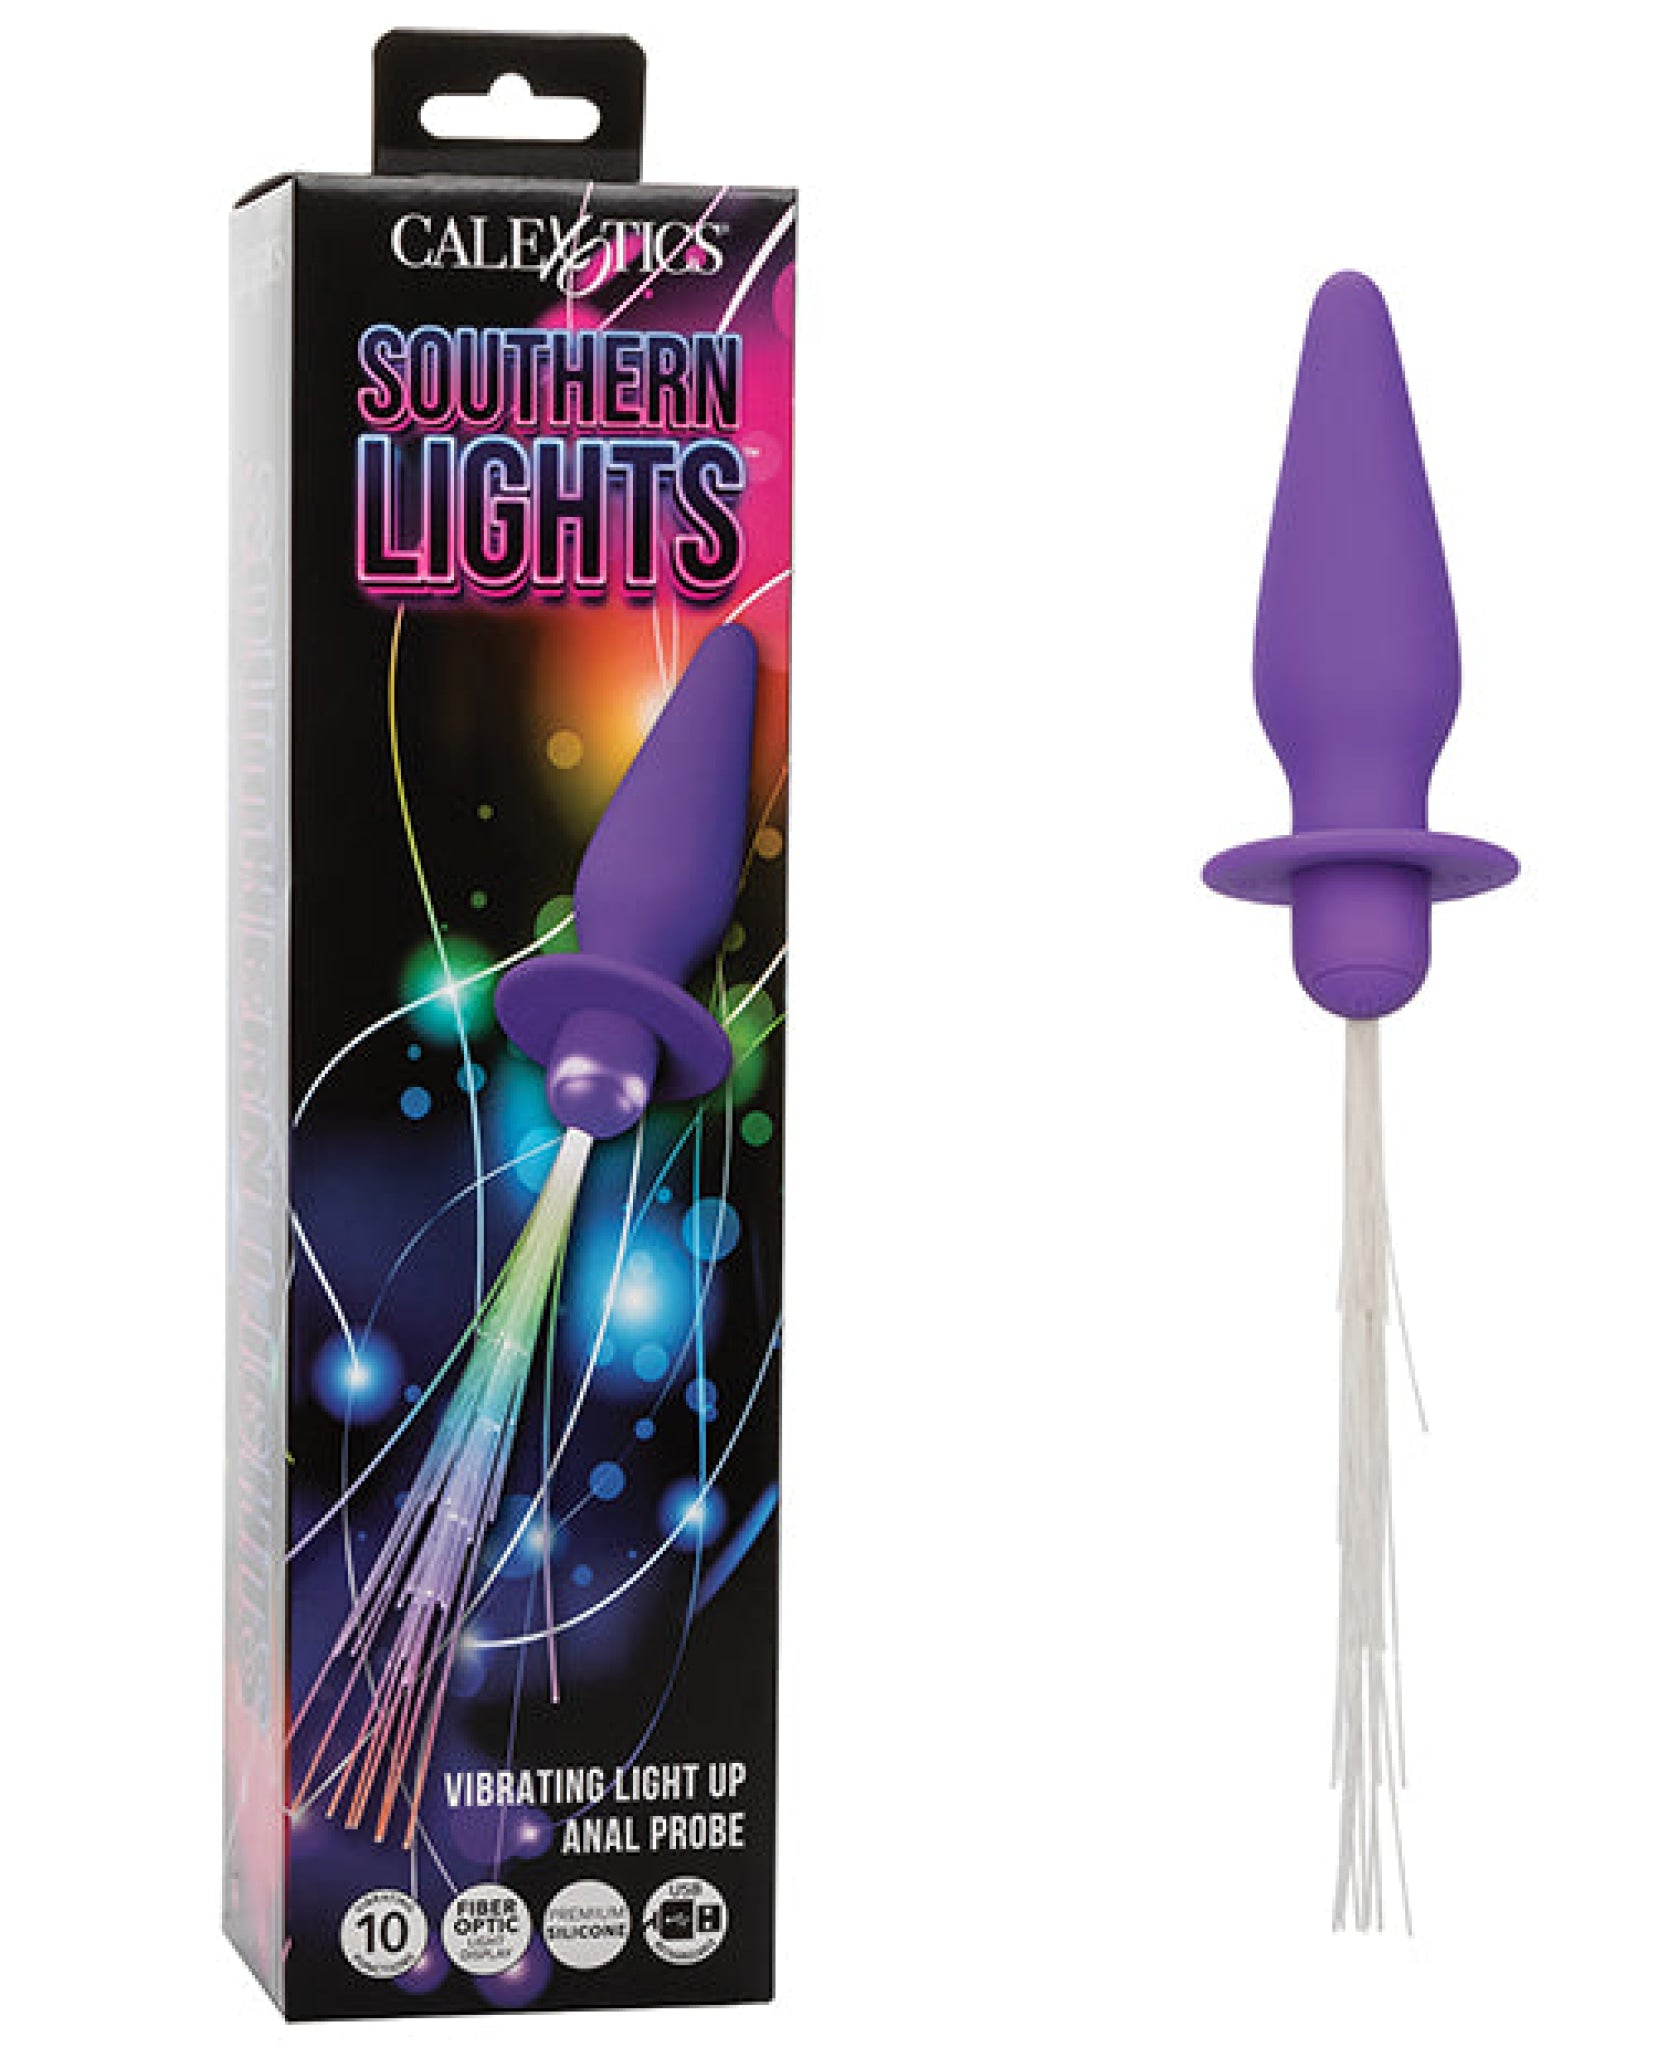 Southern Lights Rechargeable Vibrating Light Up Anal Probe California Exotic Novelties